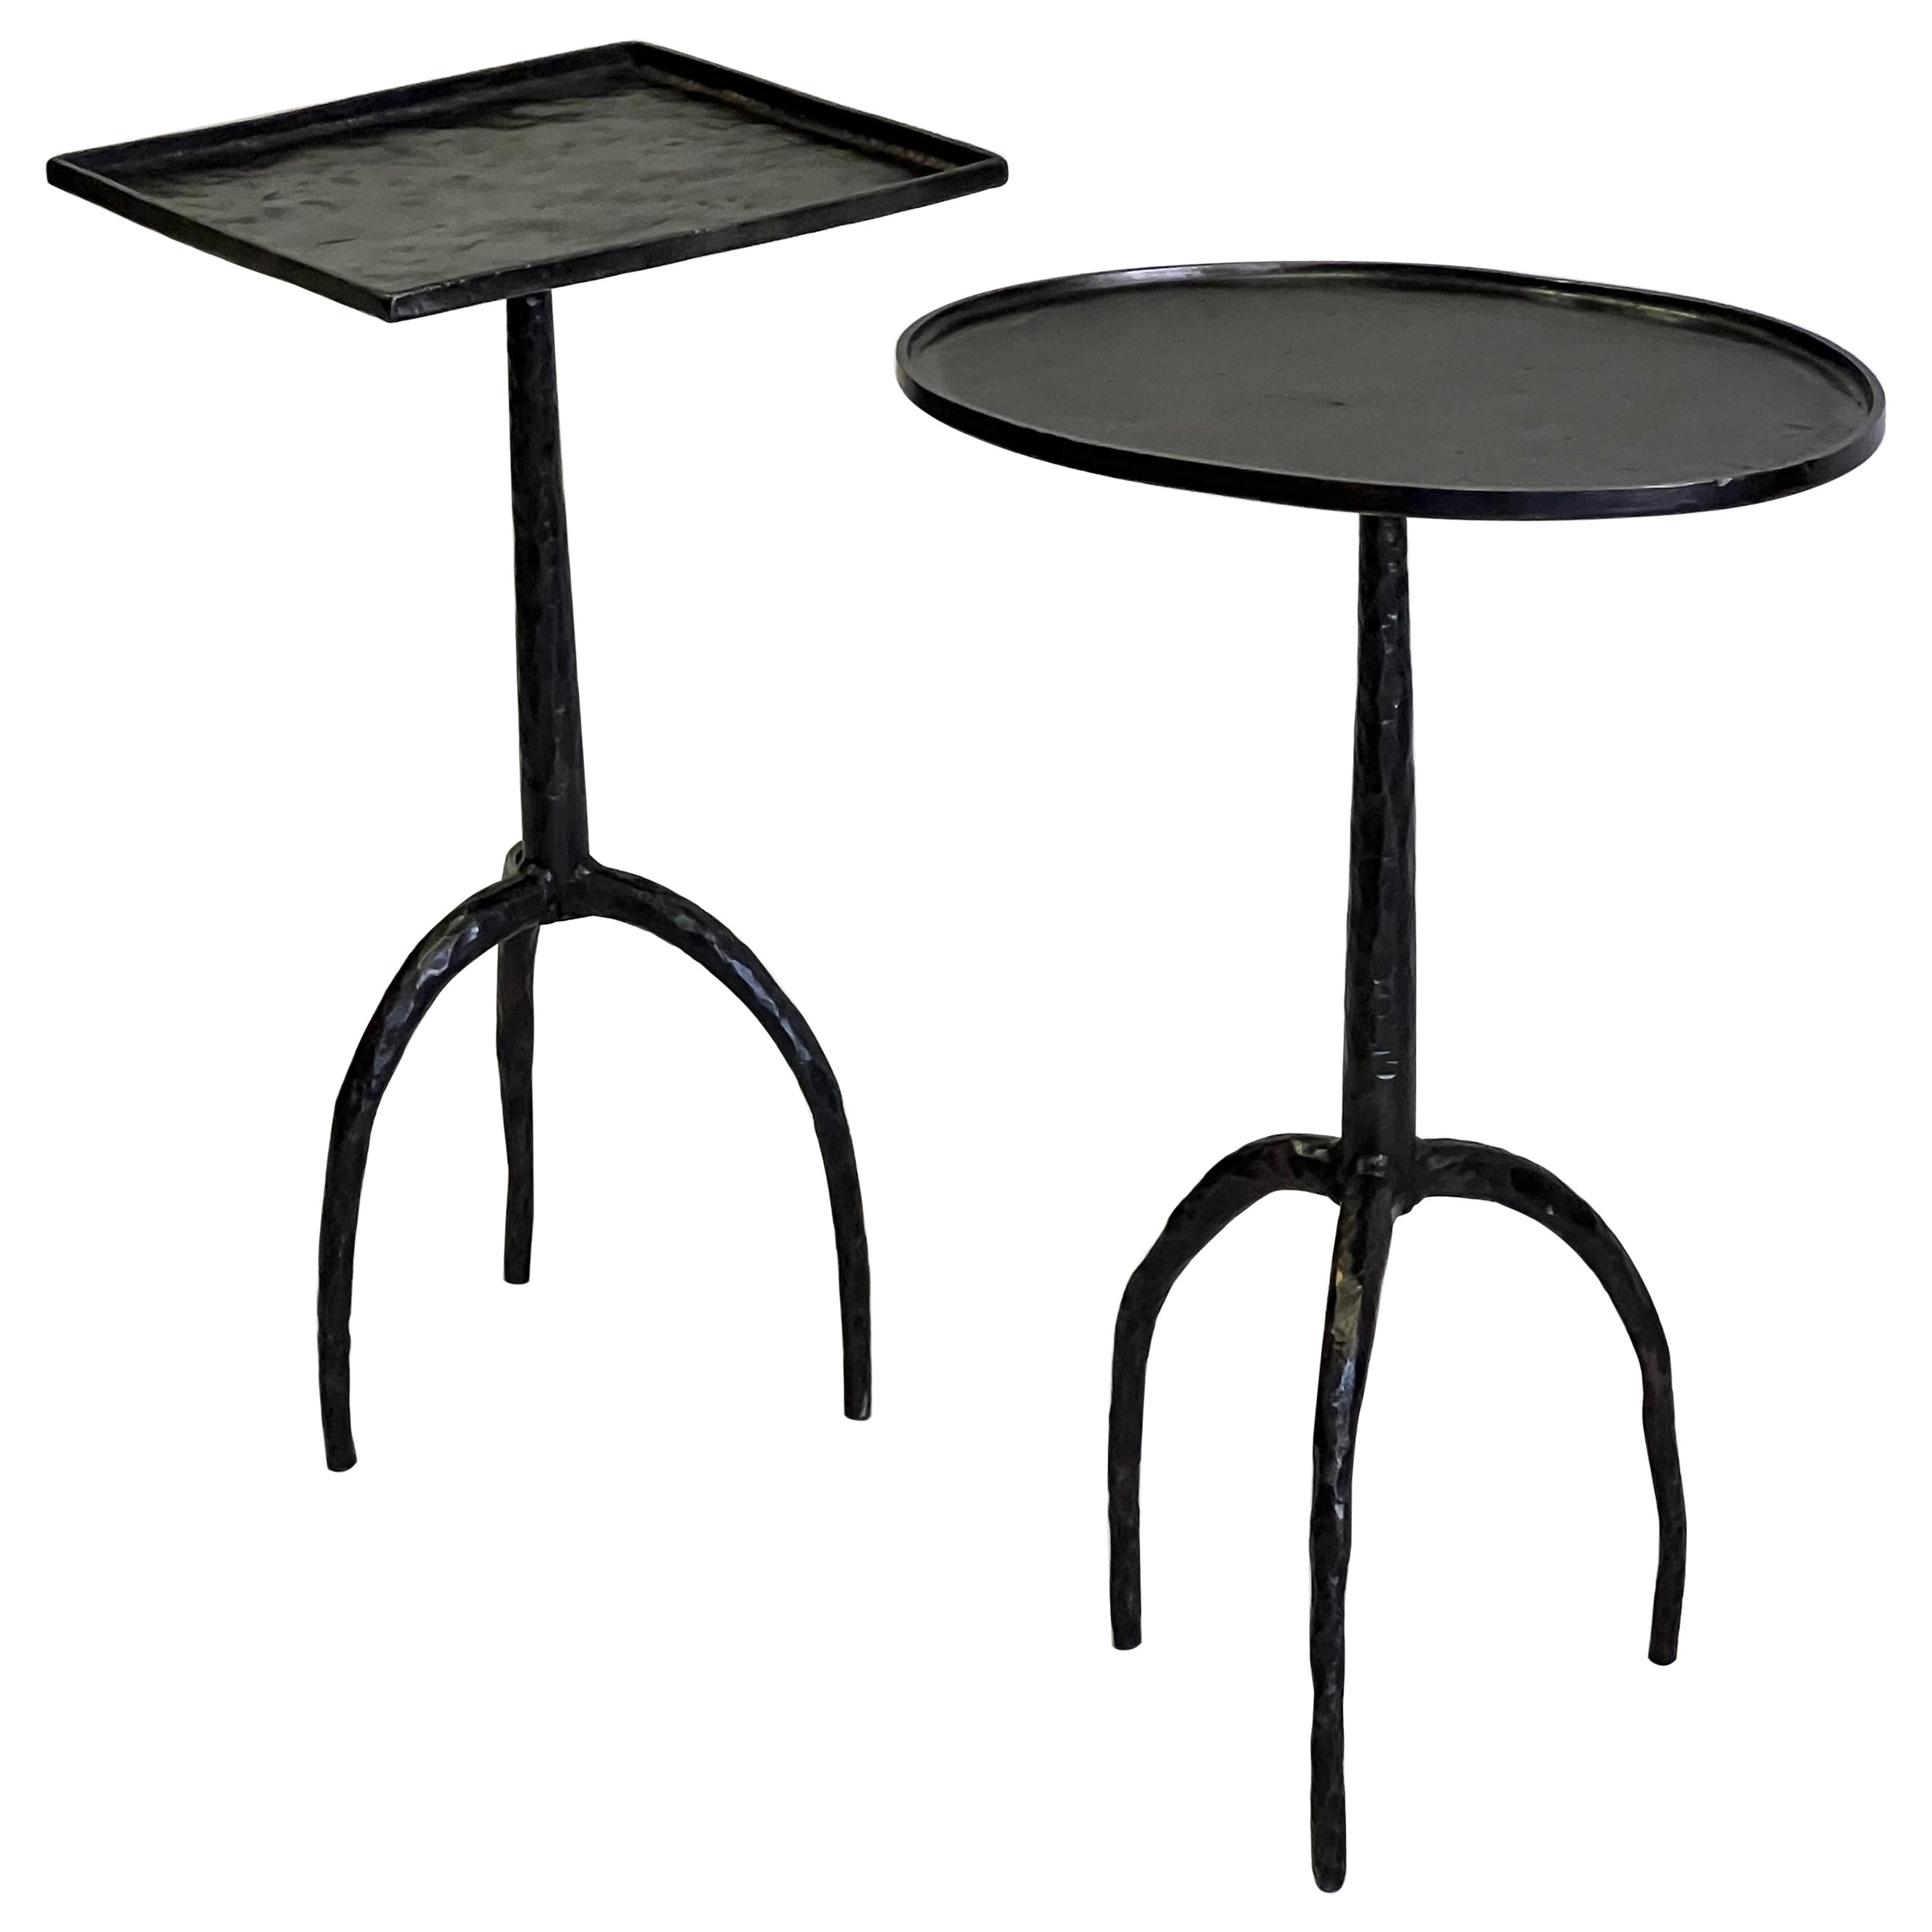 Pair of French Hammered Wrought Iron Side Tables in style of Diego Giacometti